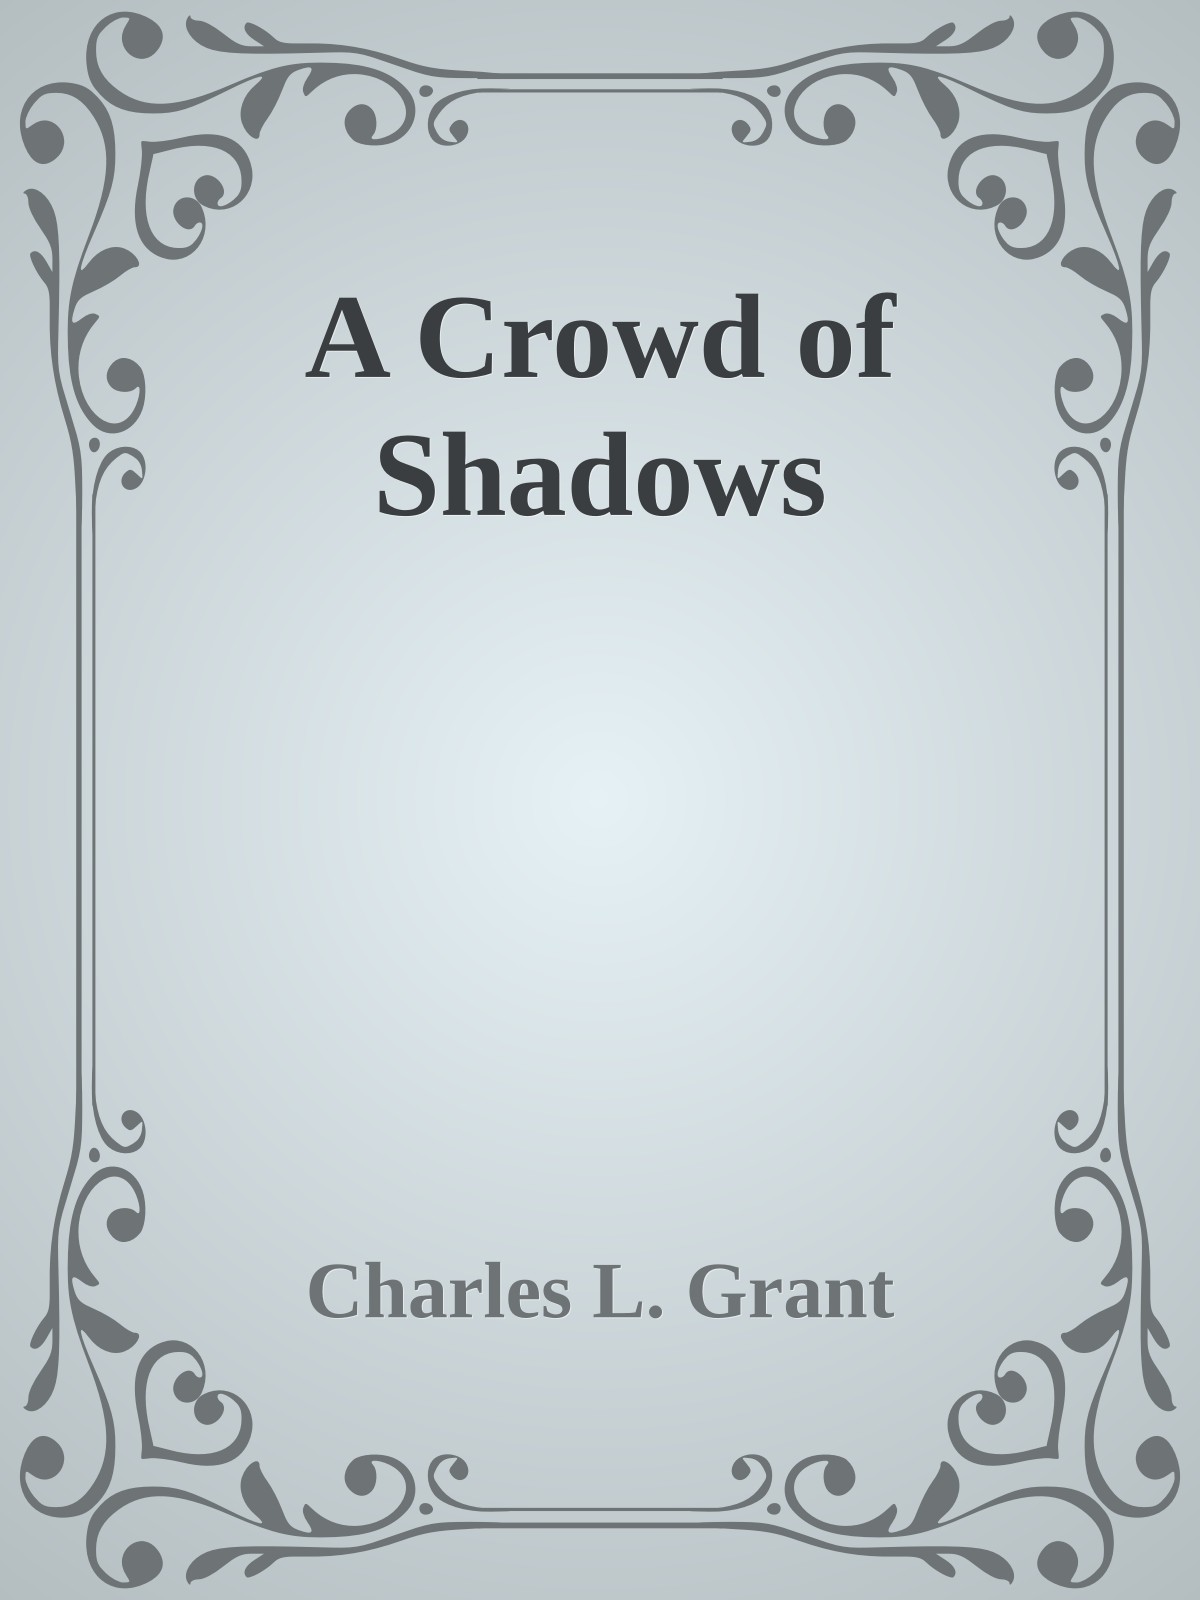 A Crowd of Shadows